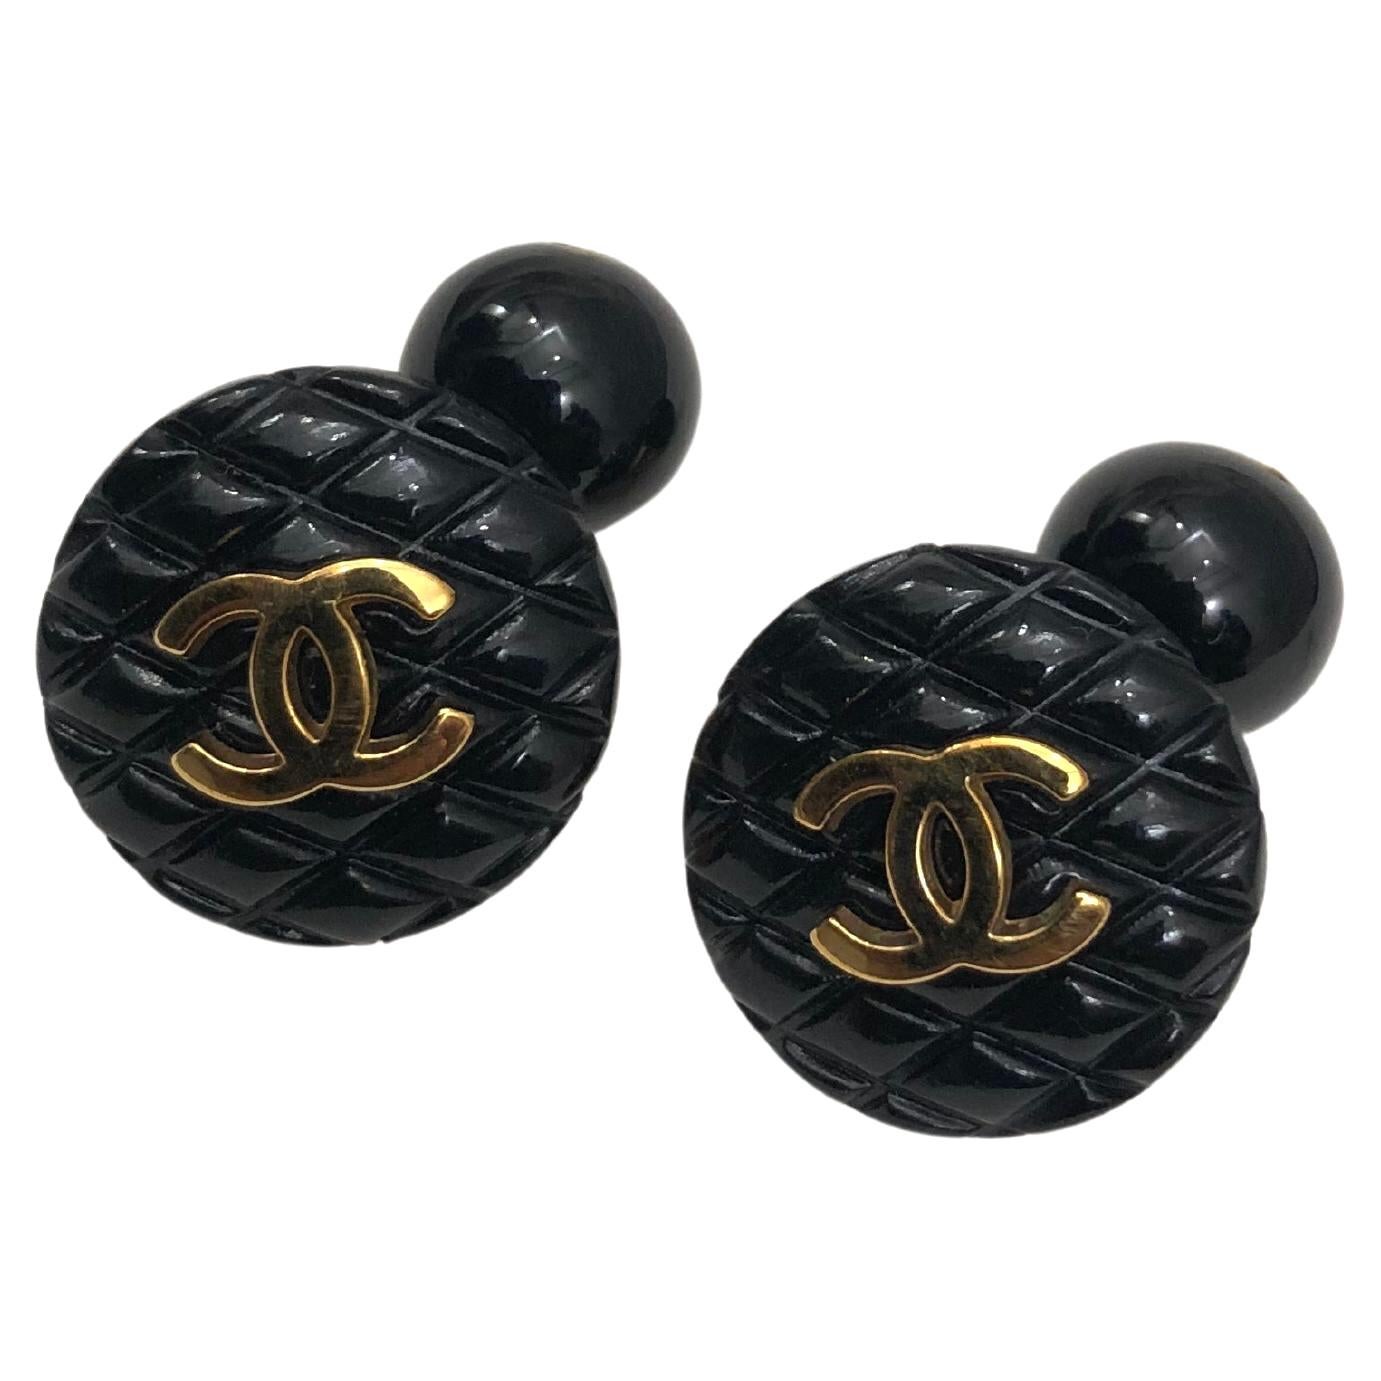 1995 Vintage CHANEL Quilted Resin CC Cufflinks Black Gold Unisex  1